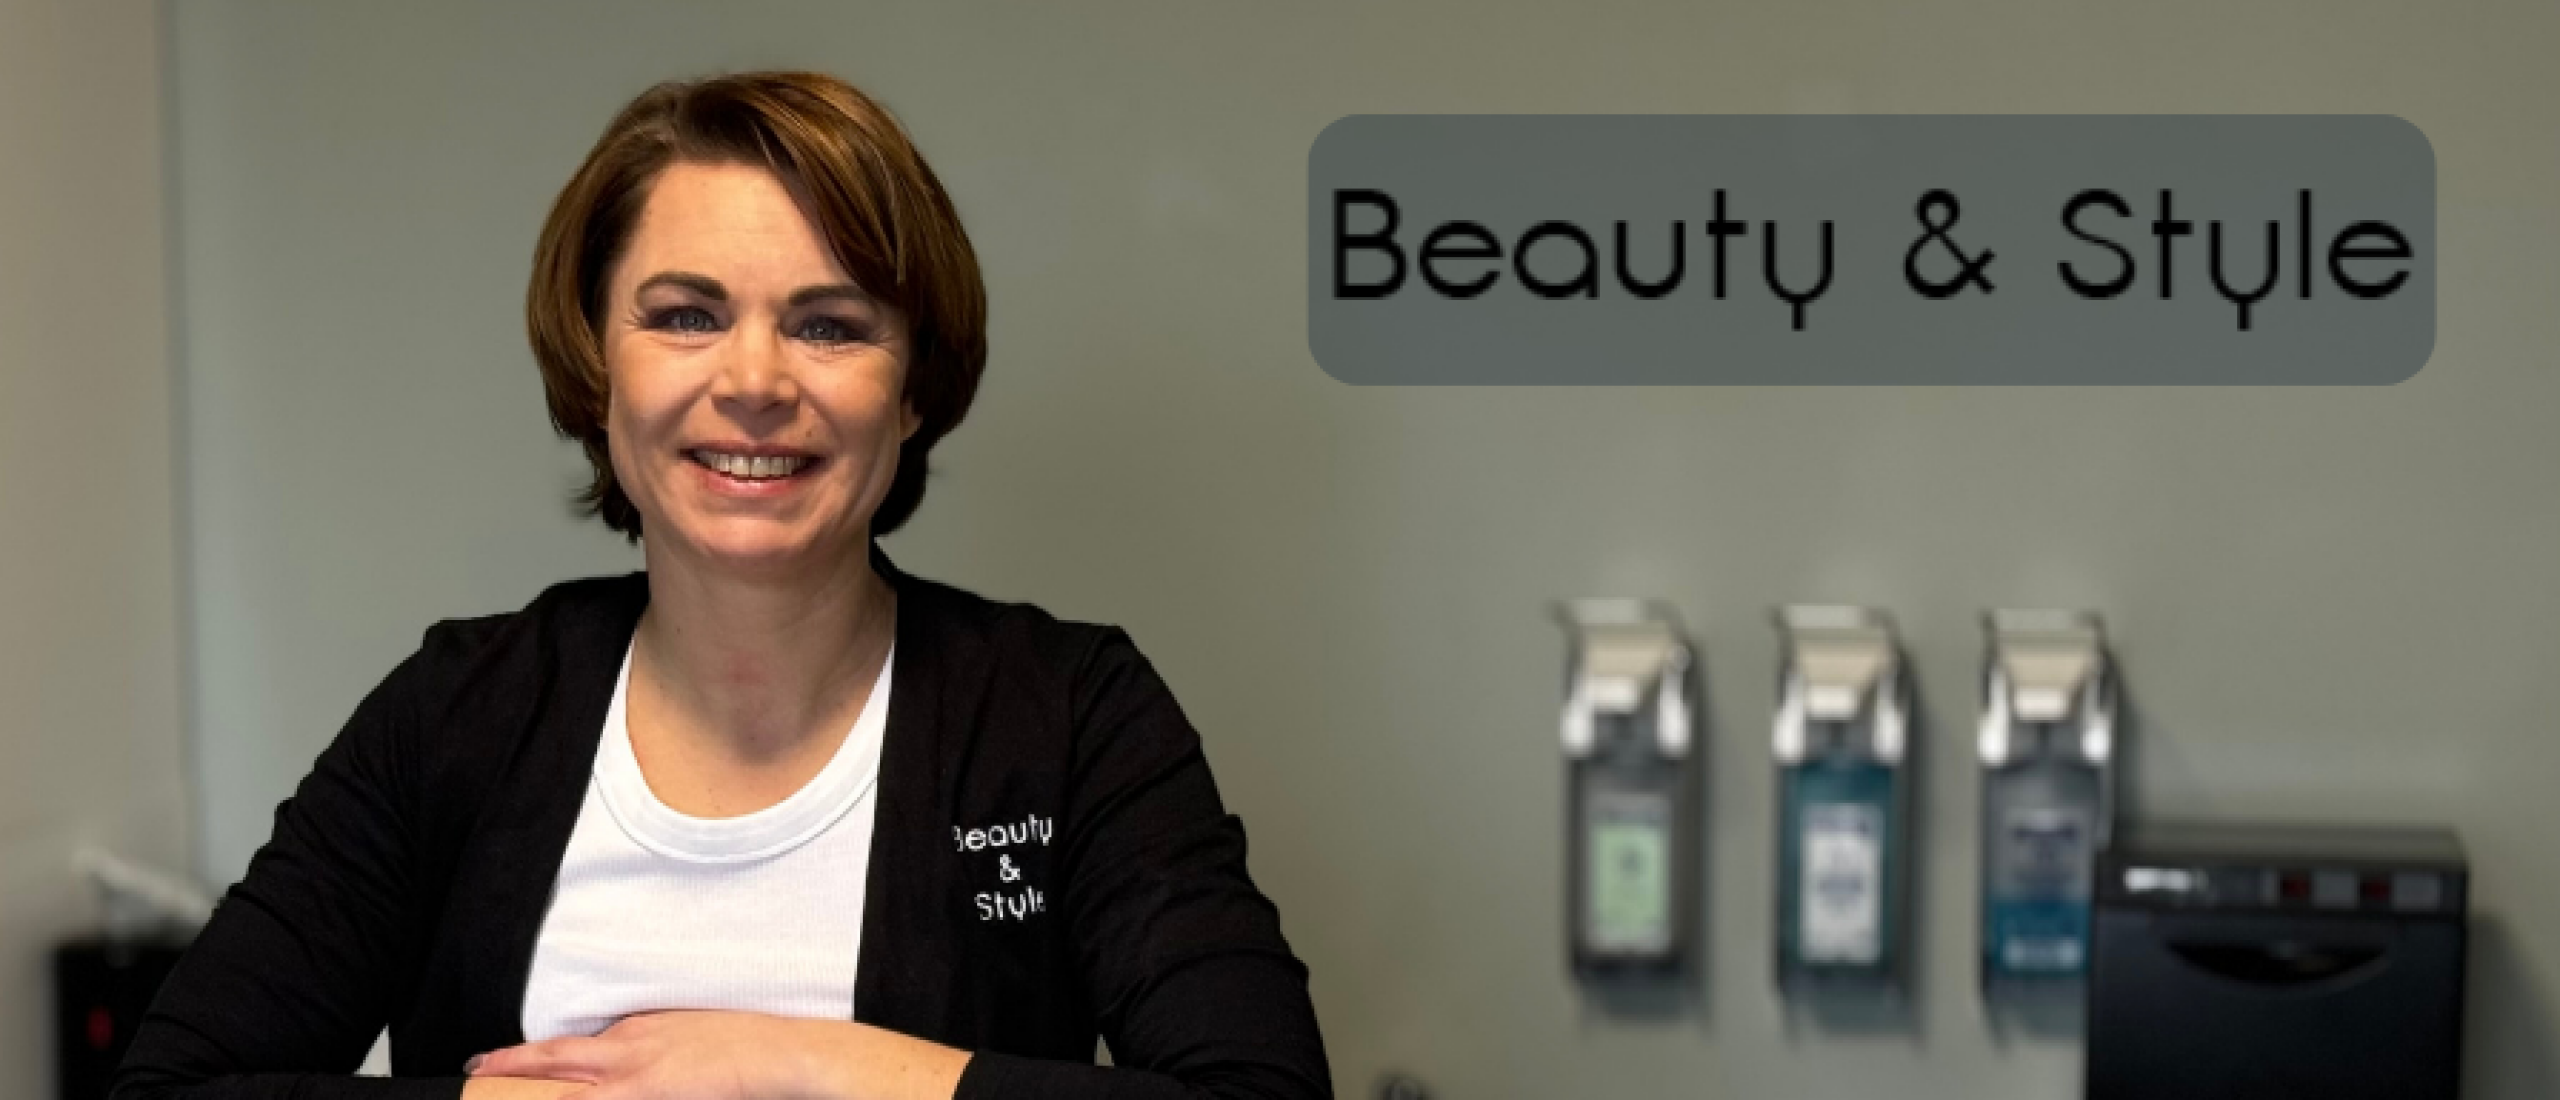 Beauty & Style banner